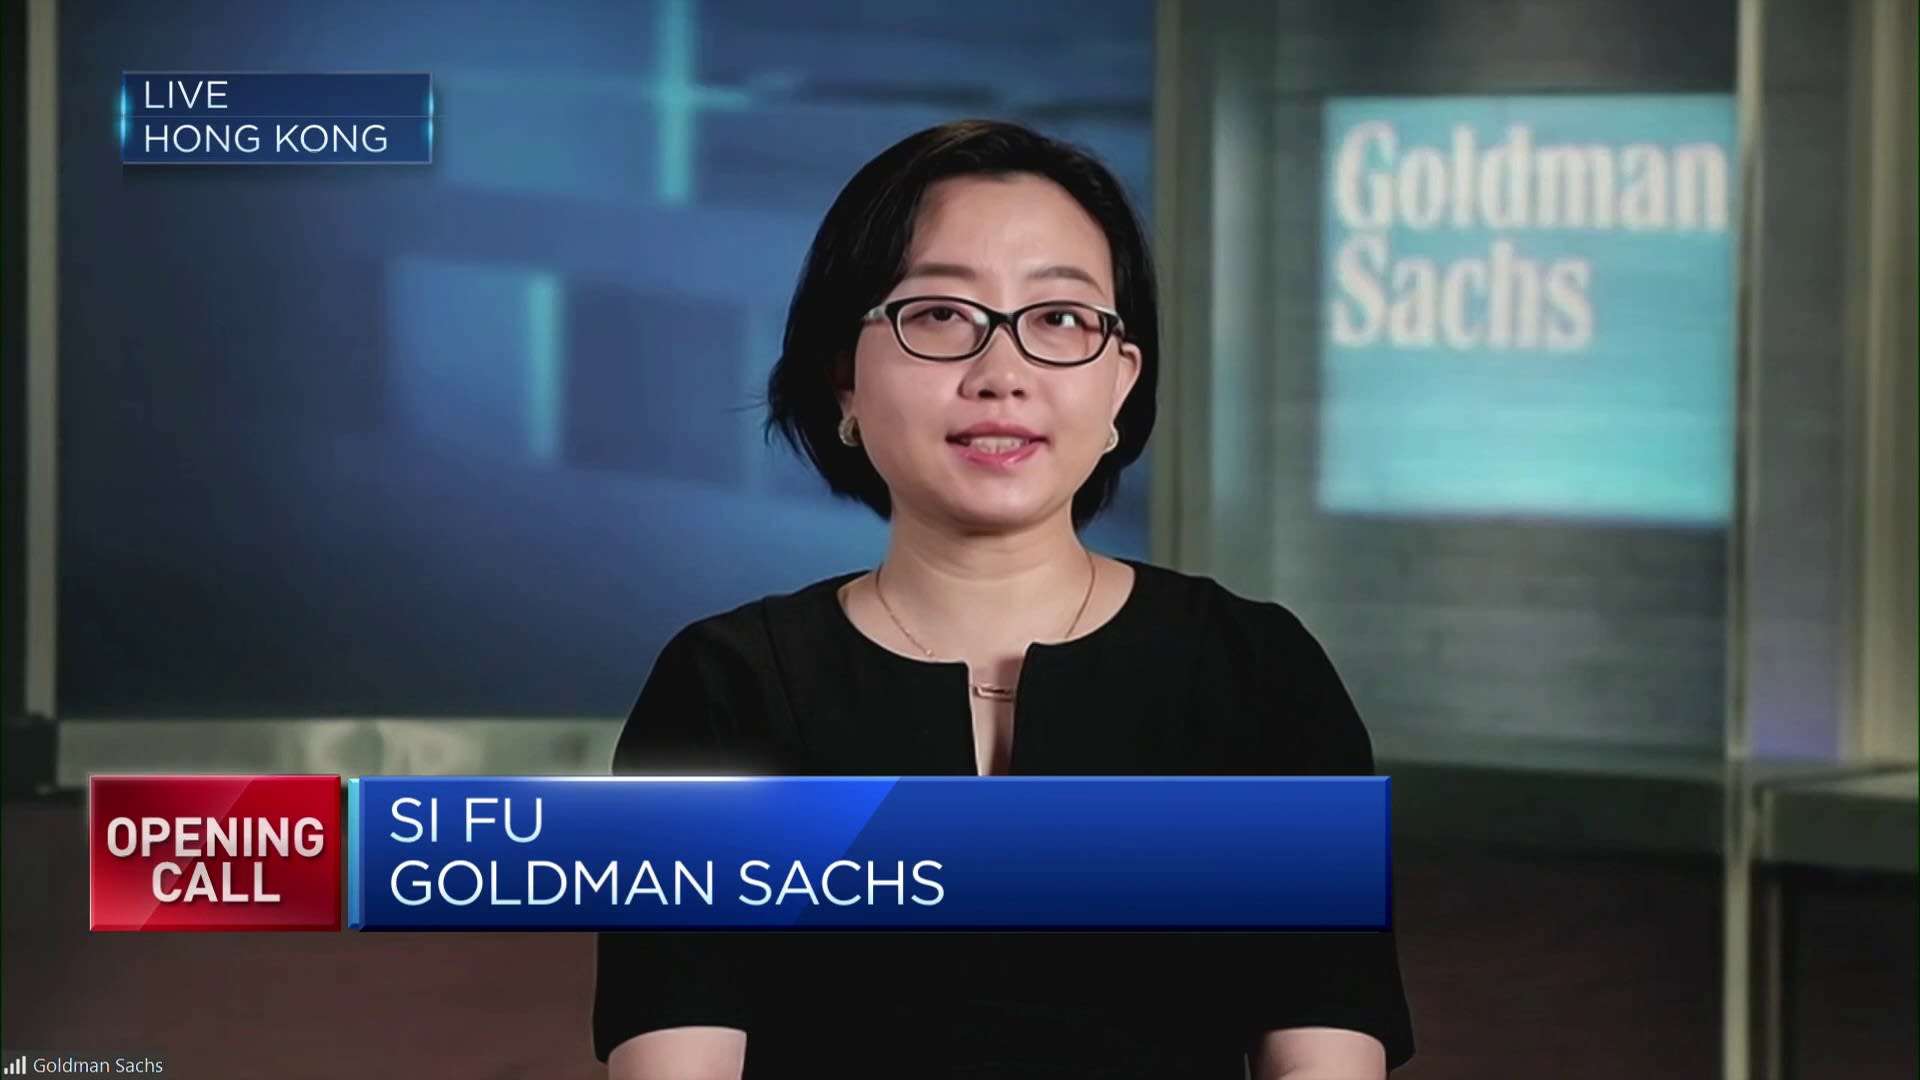 China's consumption recovery is still underway, says Goldman Sachs